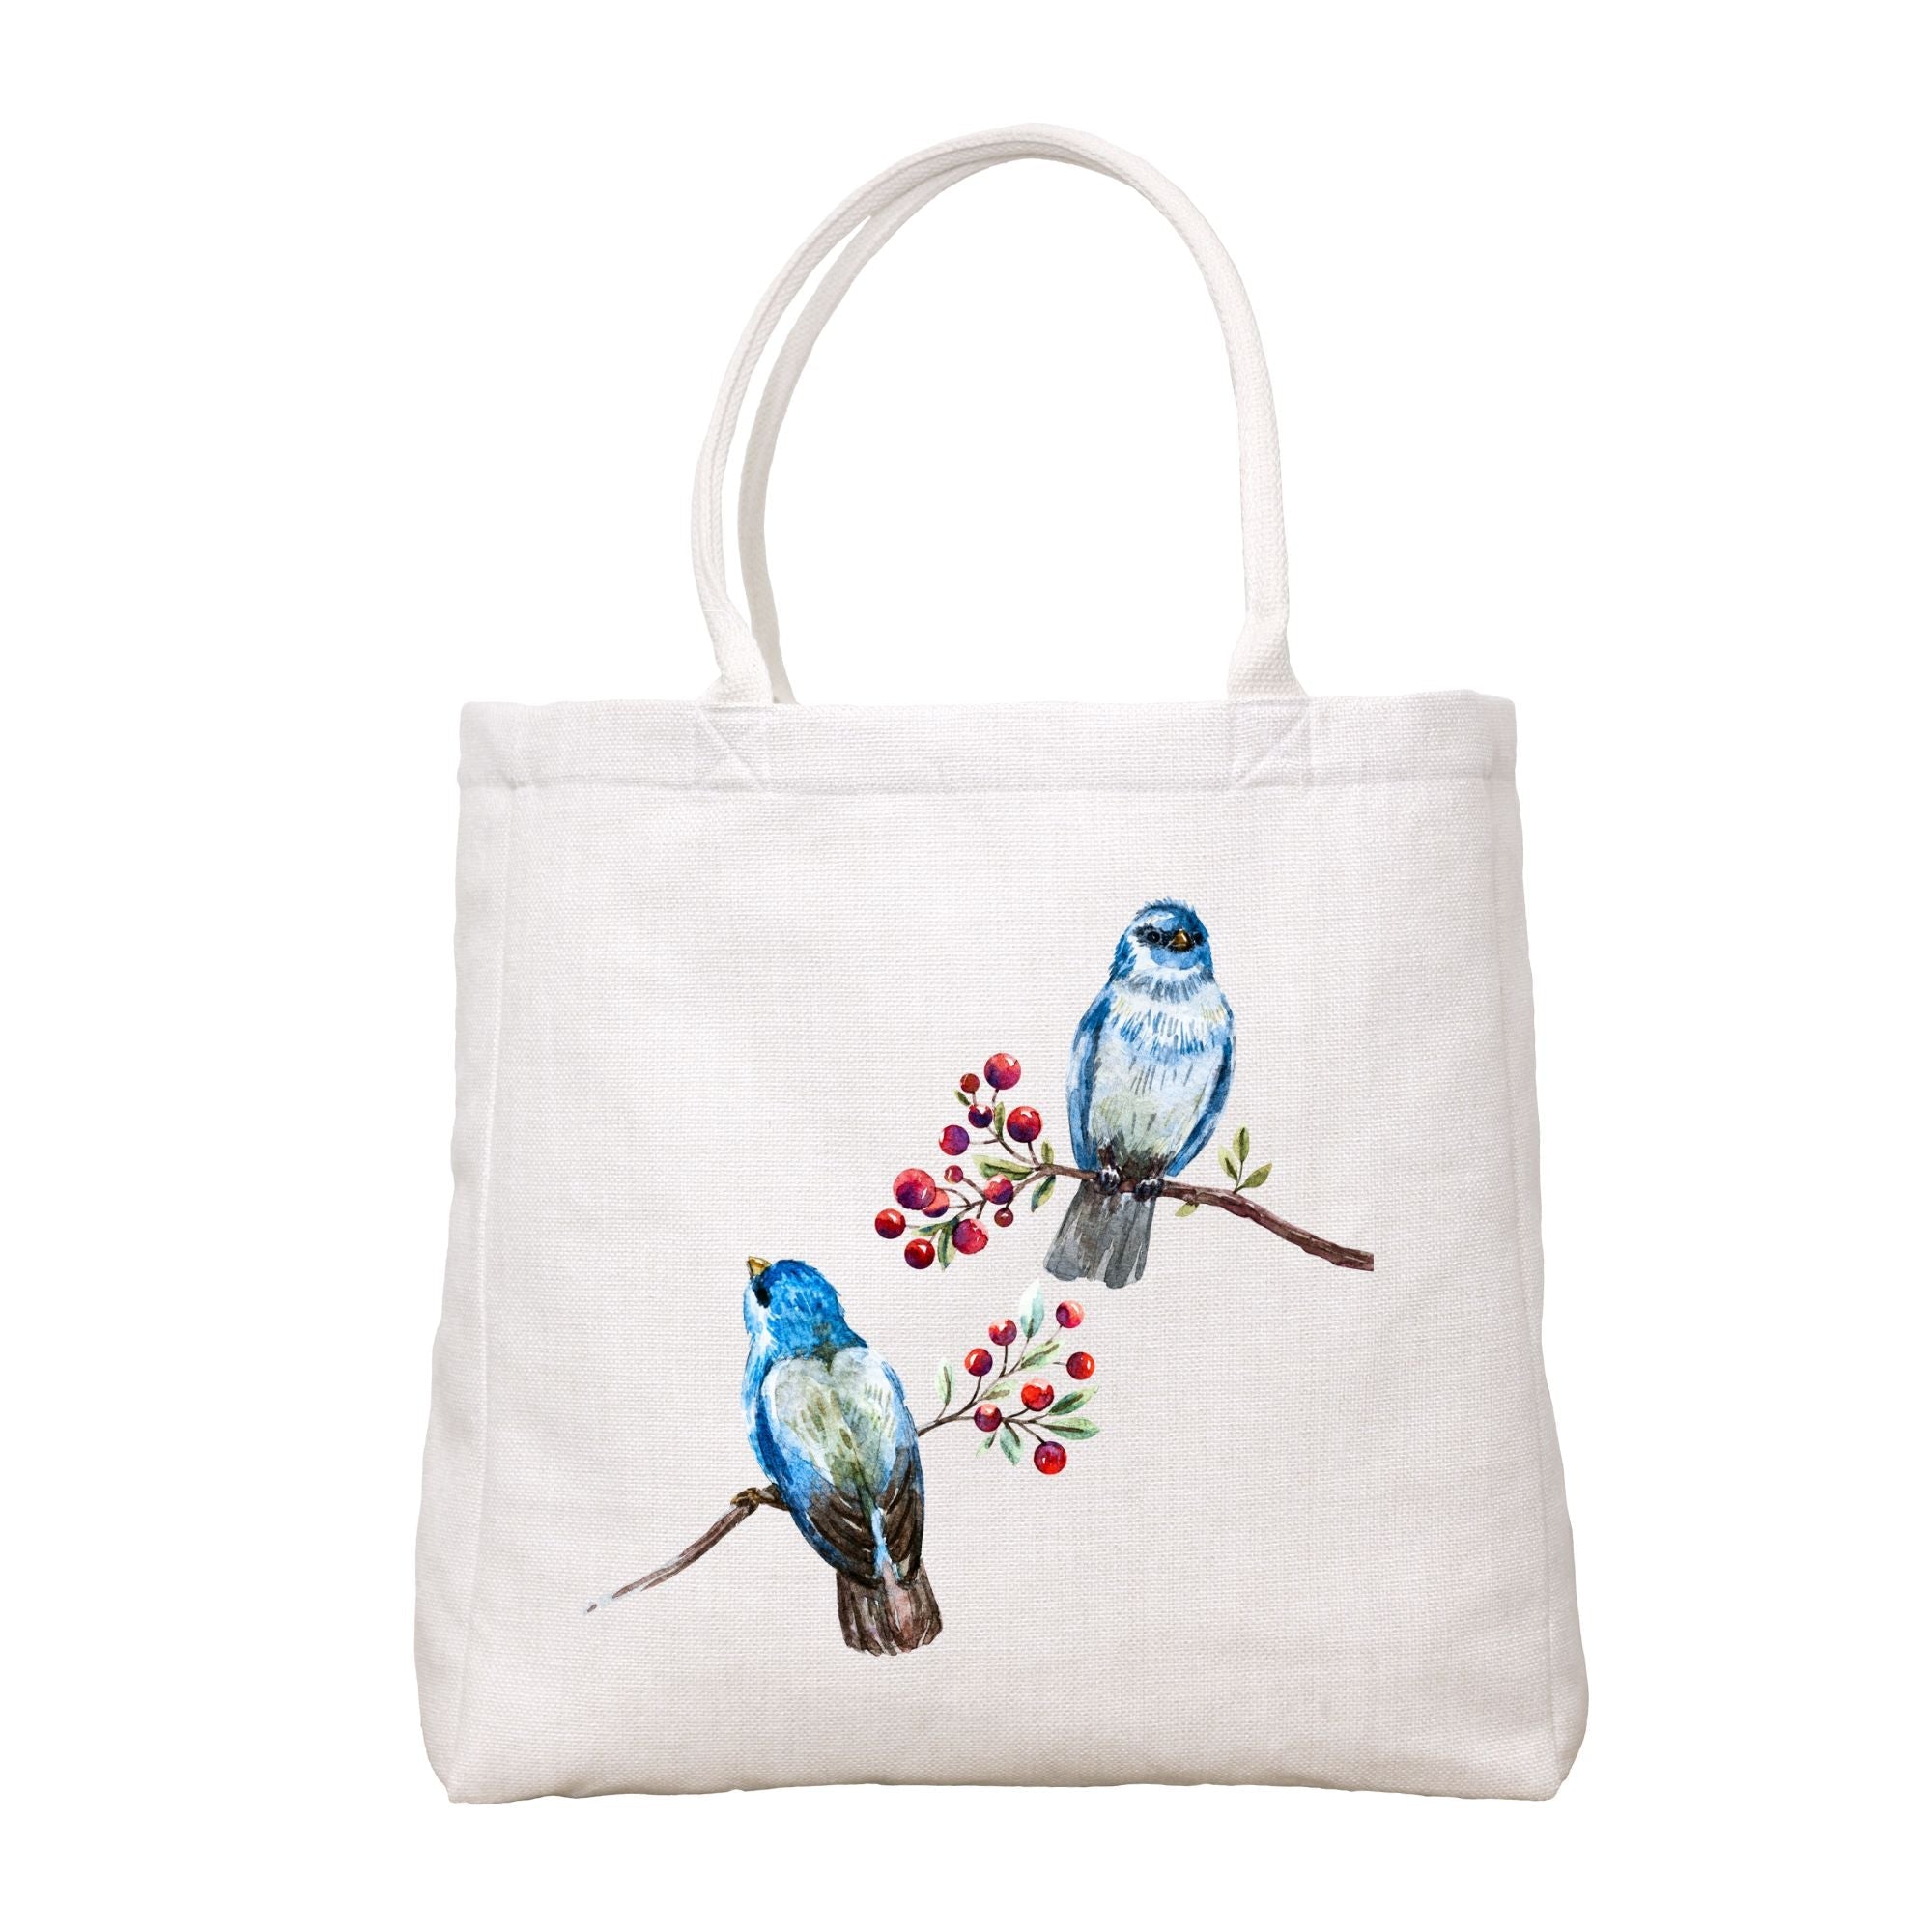 Bluebirds And Berries Tote Bag